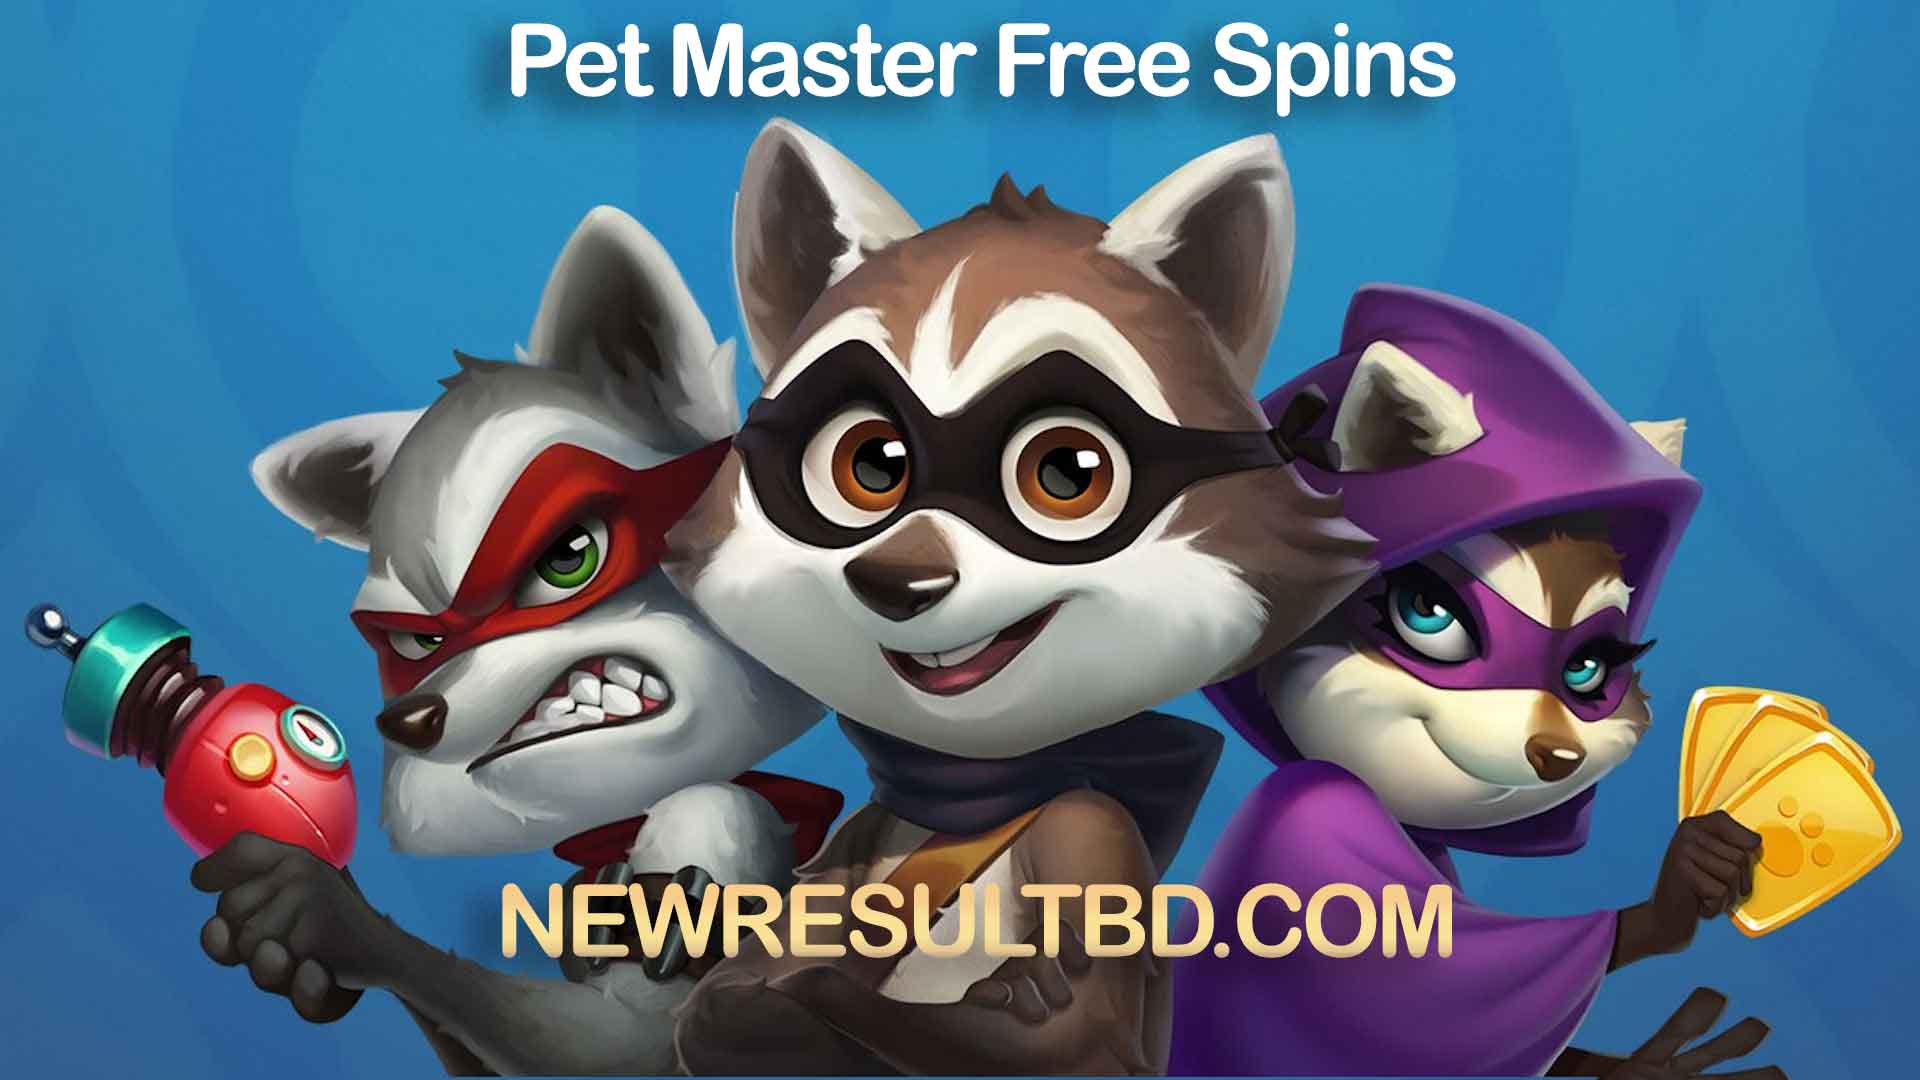 Pet Master free spins – daily links